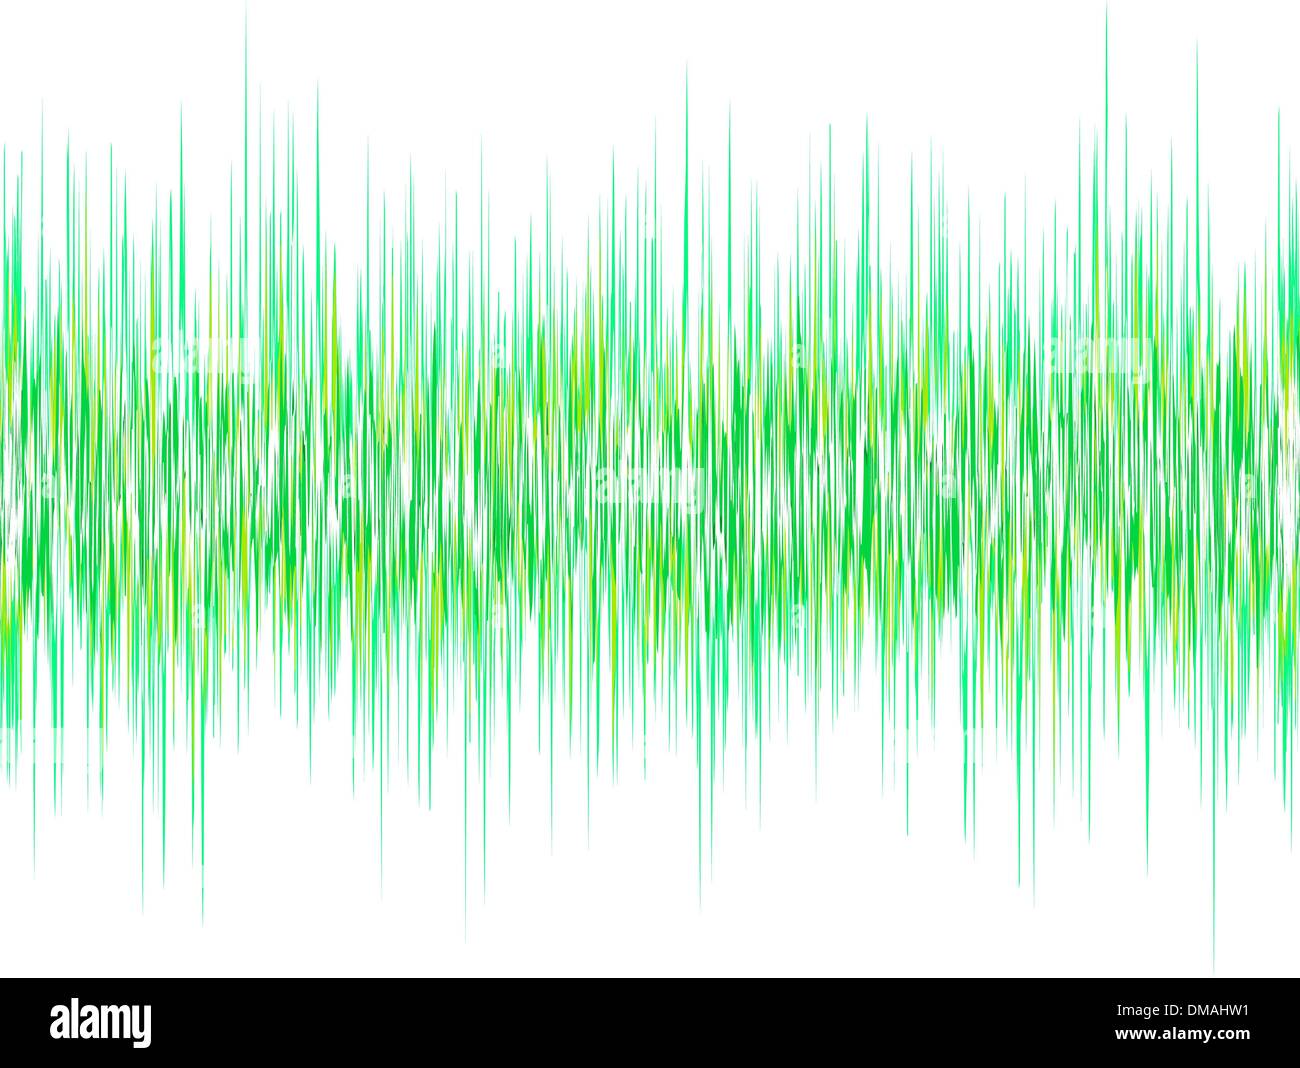 Wave sound background. EPS 8 Stock Vector